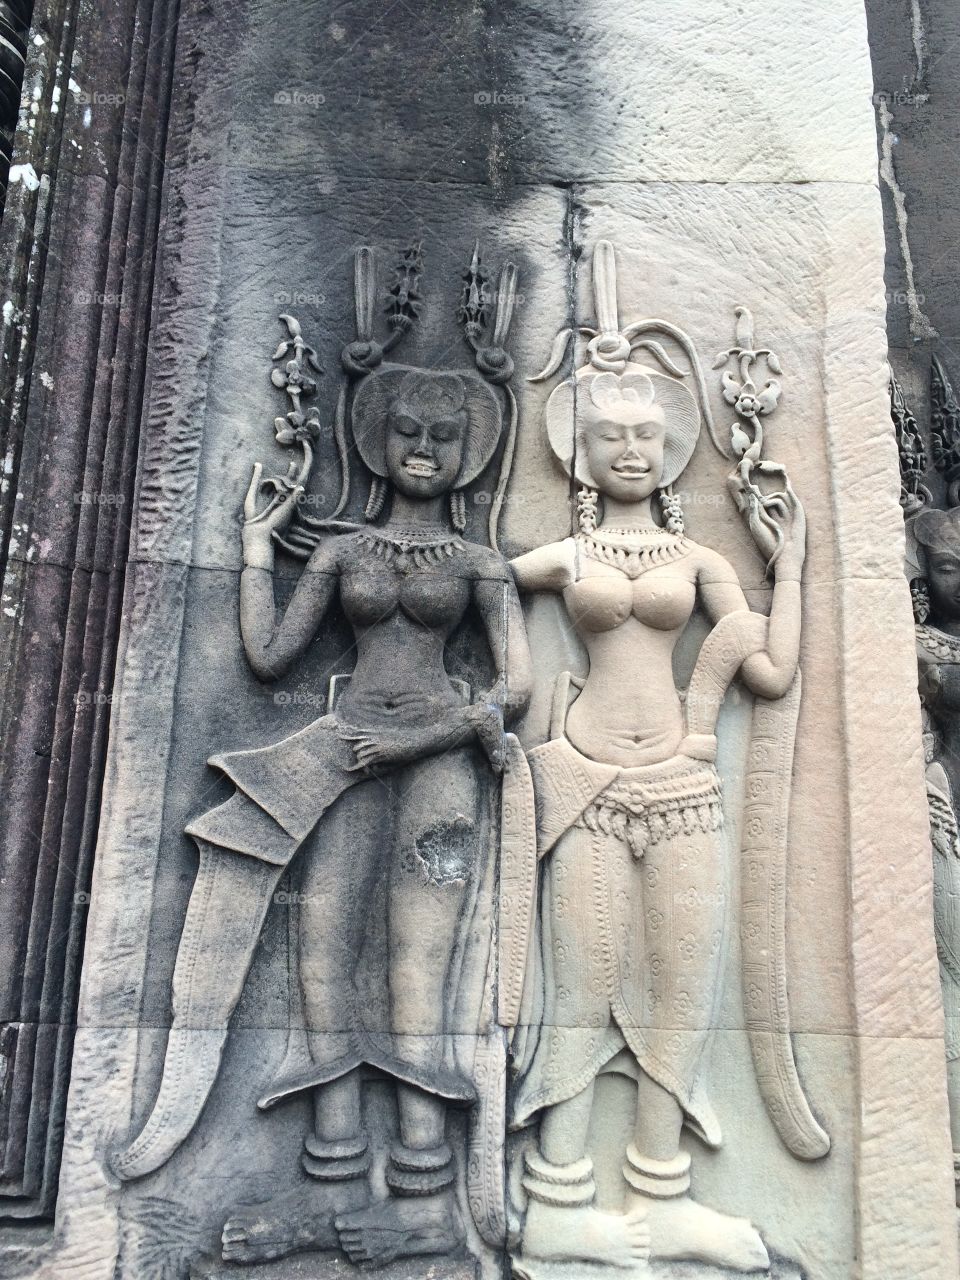 Siem Reap, Cambodia (Angkor Wat temple): nude sculptures of Eastern Asia culture 